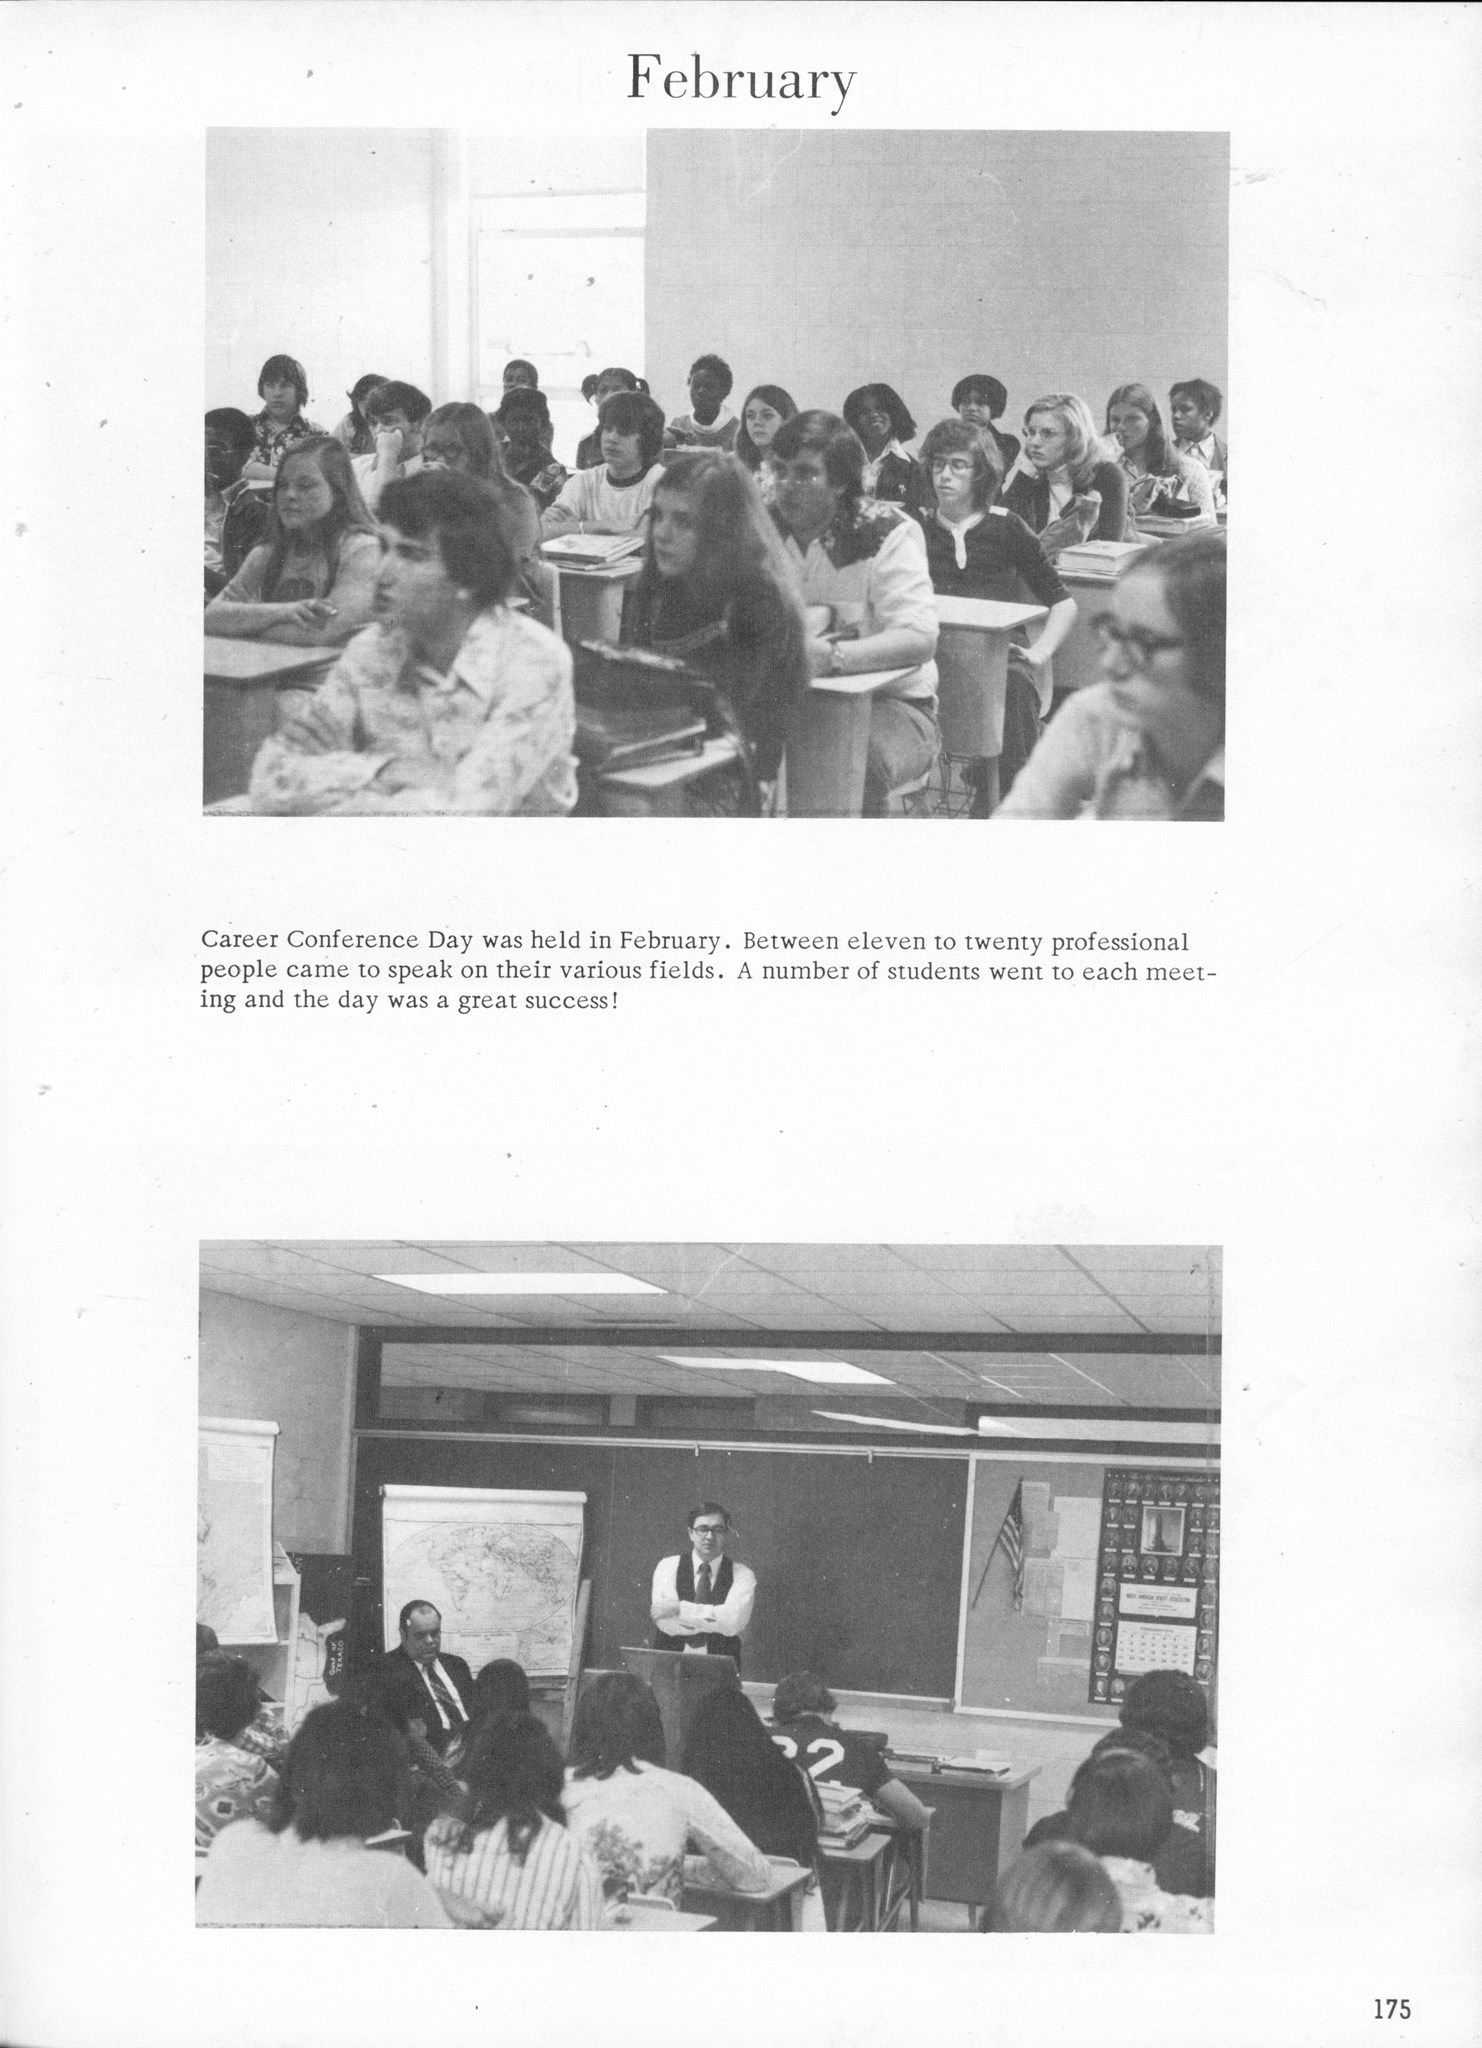 ../../../Images/Large/1976/Arclight-1976-pg0175.jpg